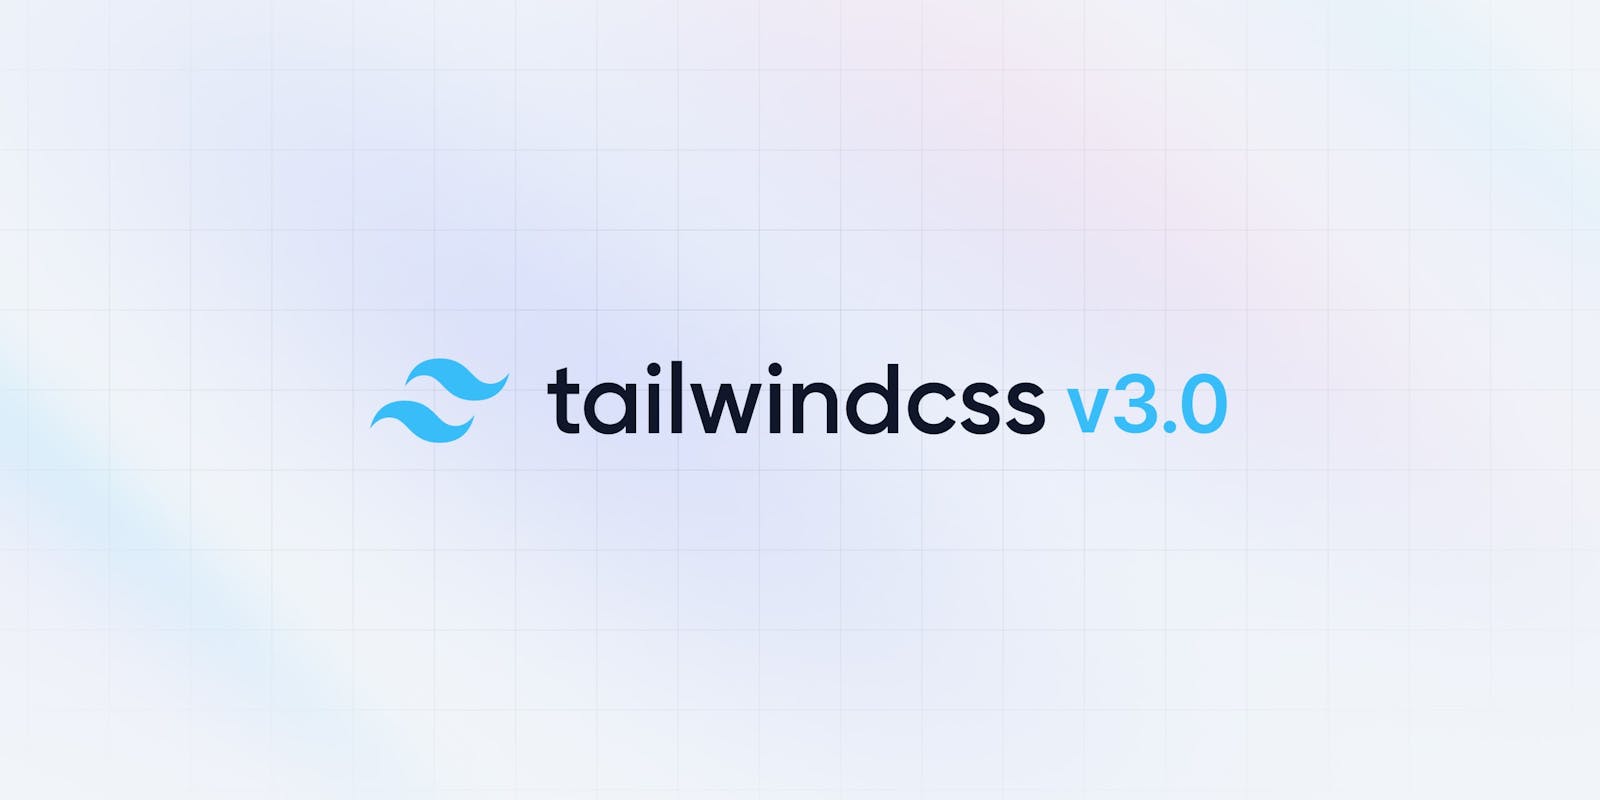 Upgrade your Tailwind CSS project to version 3.0